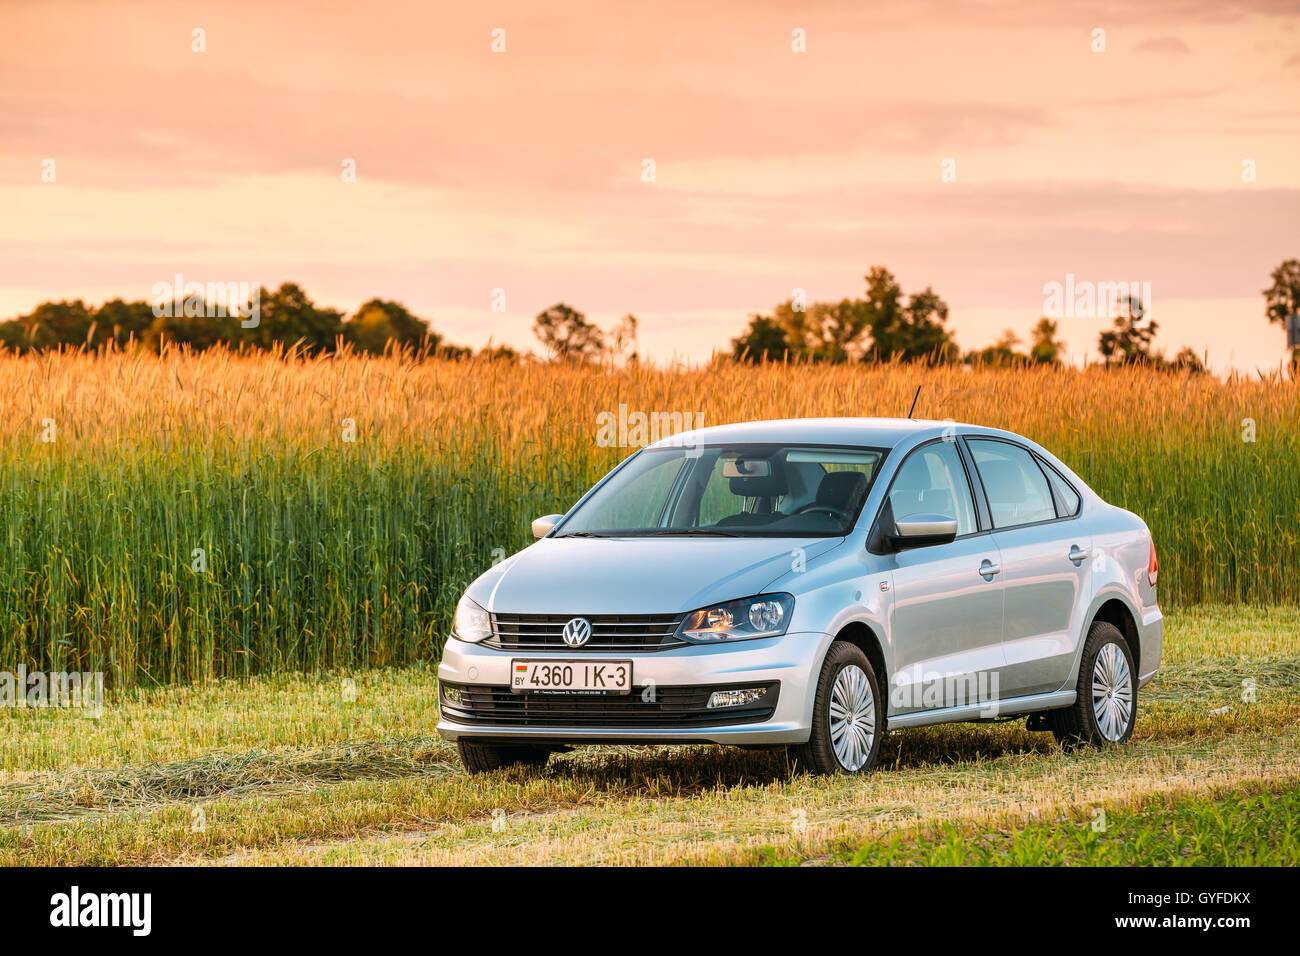 Gomel, Belarus - June 6, 2016: Volkswagen Polo Car Parking On Wheat Field.  Sunset Sunrise Dramatic Sky On A Background In Sunny Stock Photo - Alamy